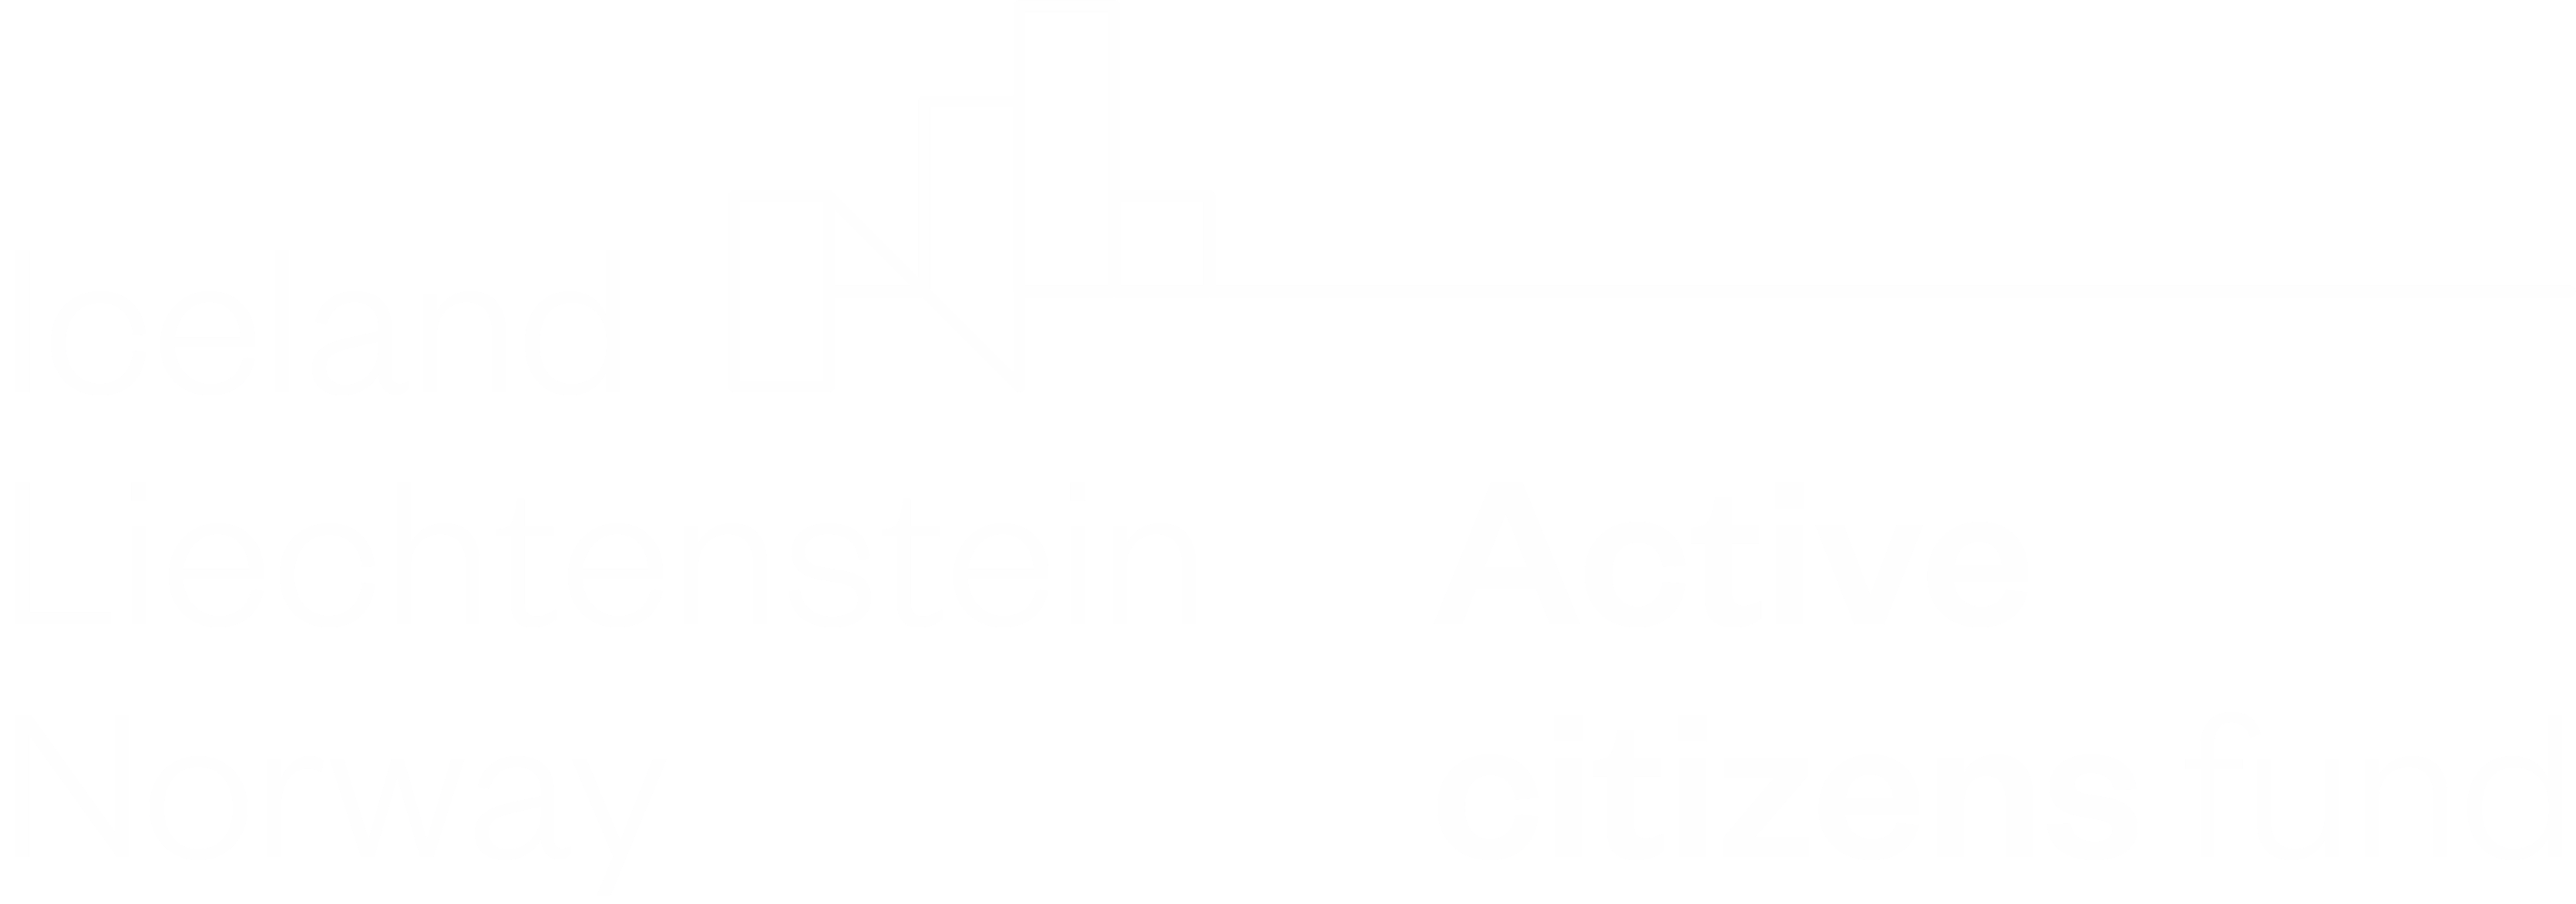 Logo of the Active Citizens Fund